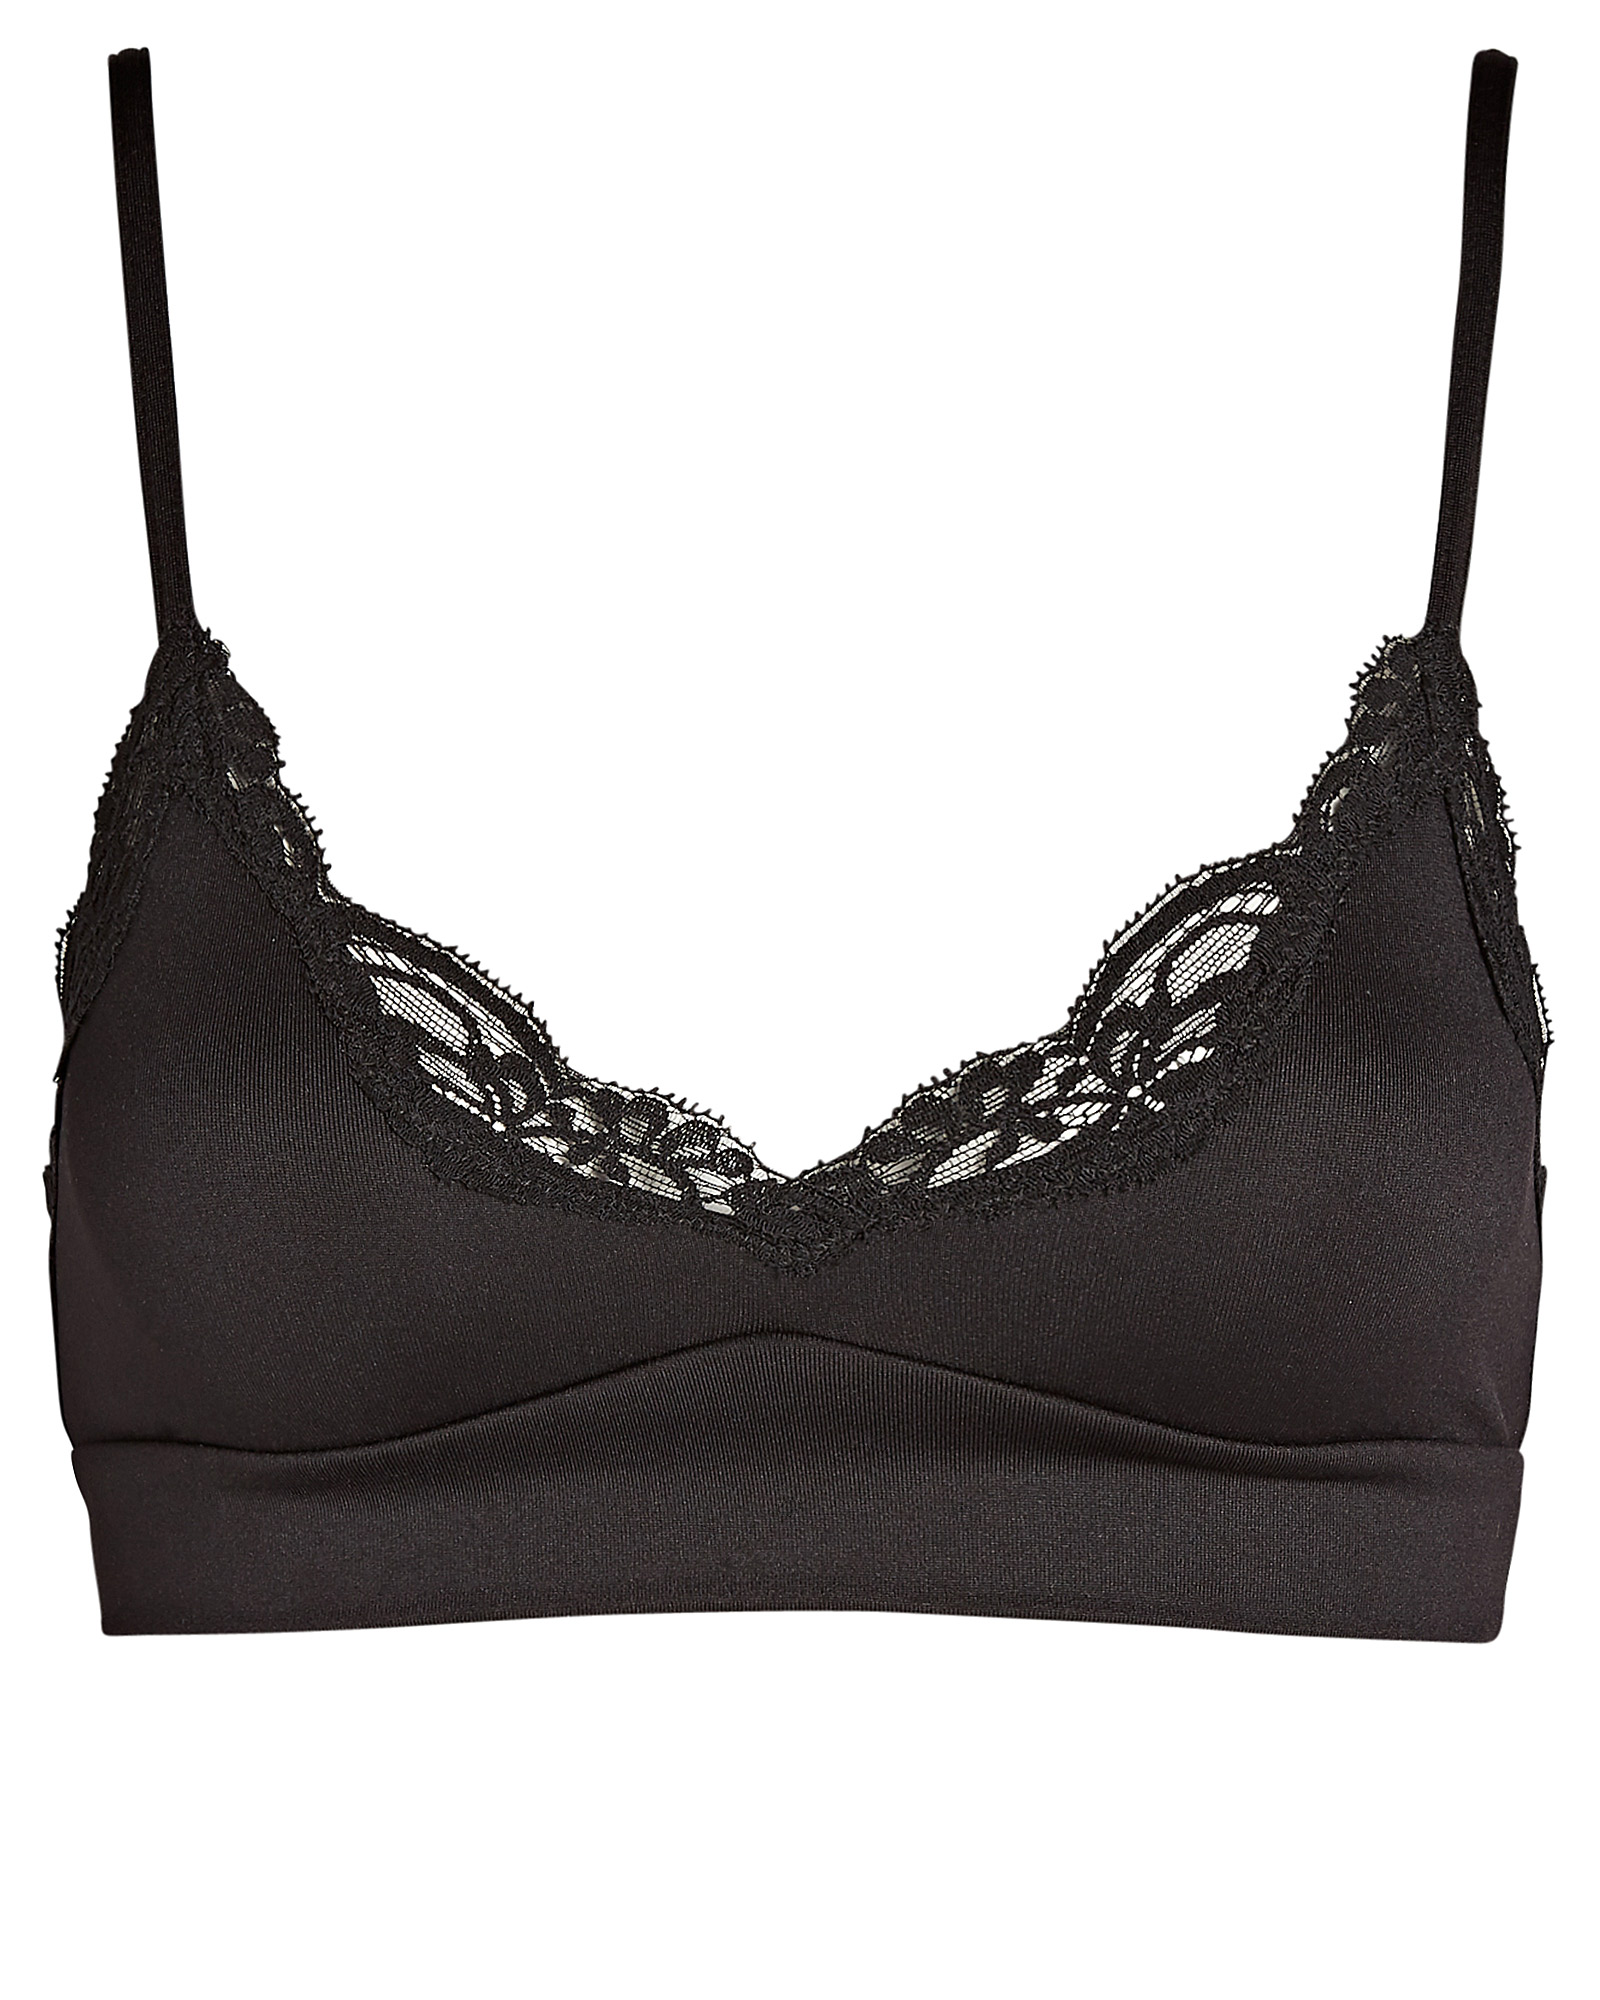 Only Hearts Delicious Lace Bralette | INTERMIX®